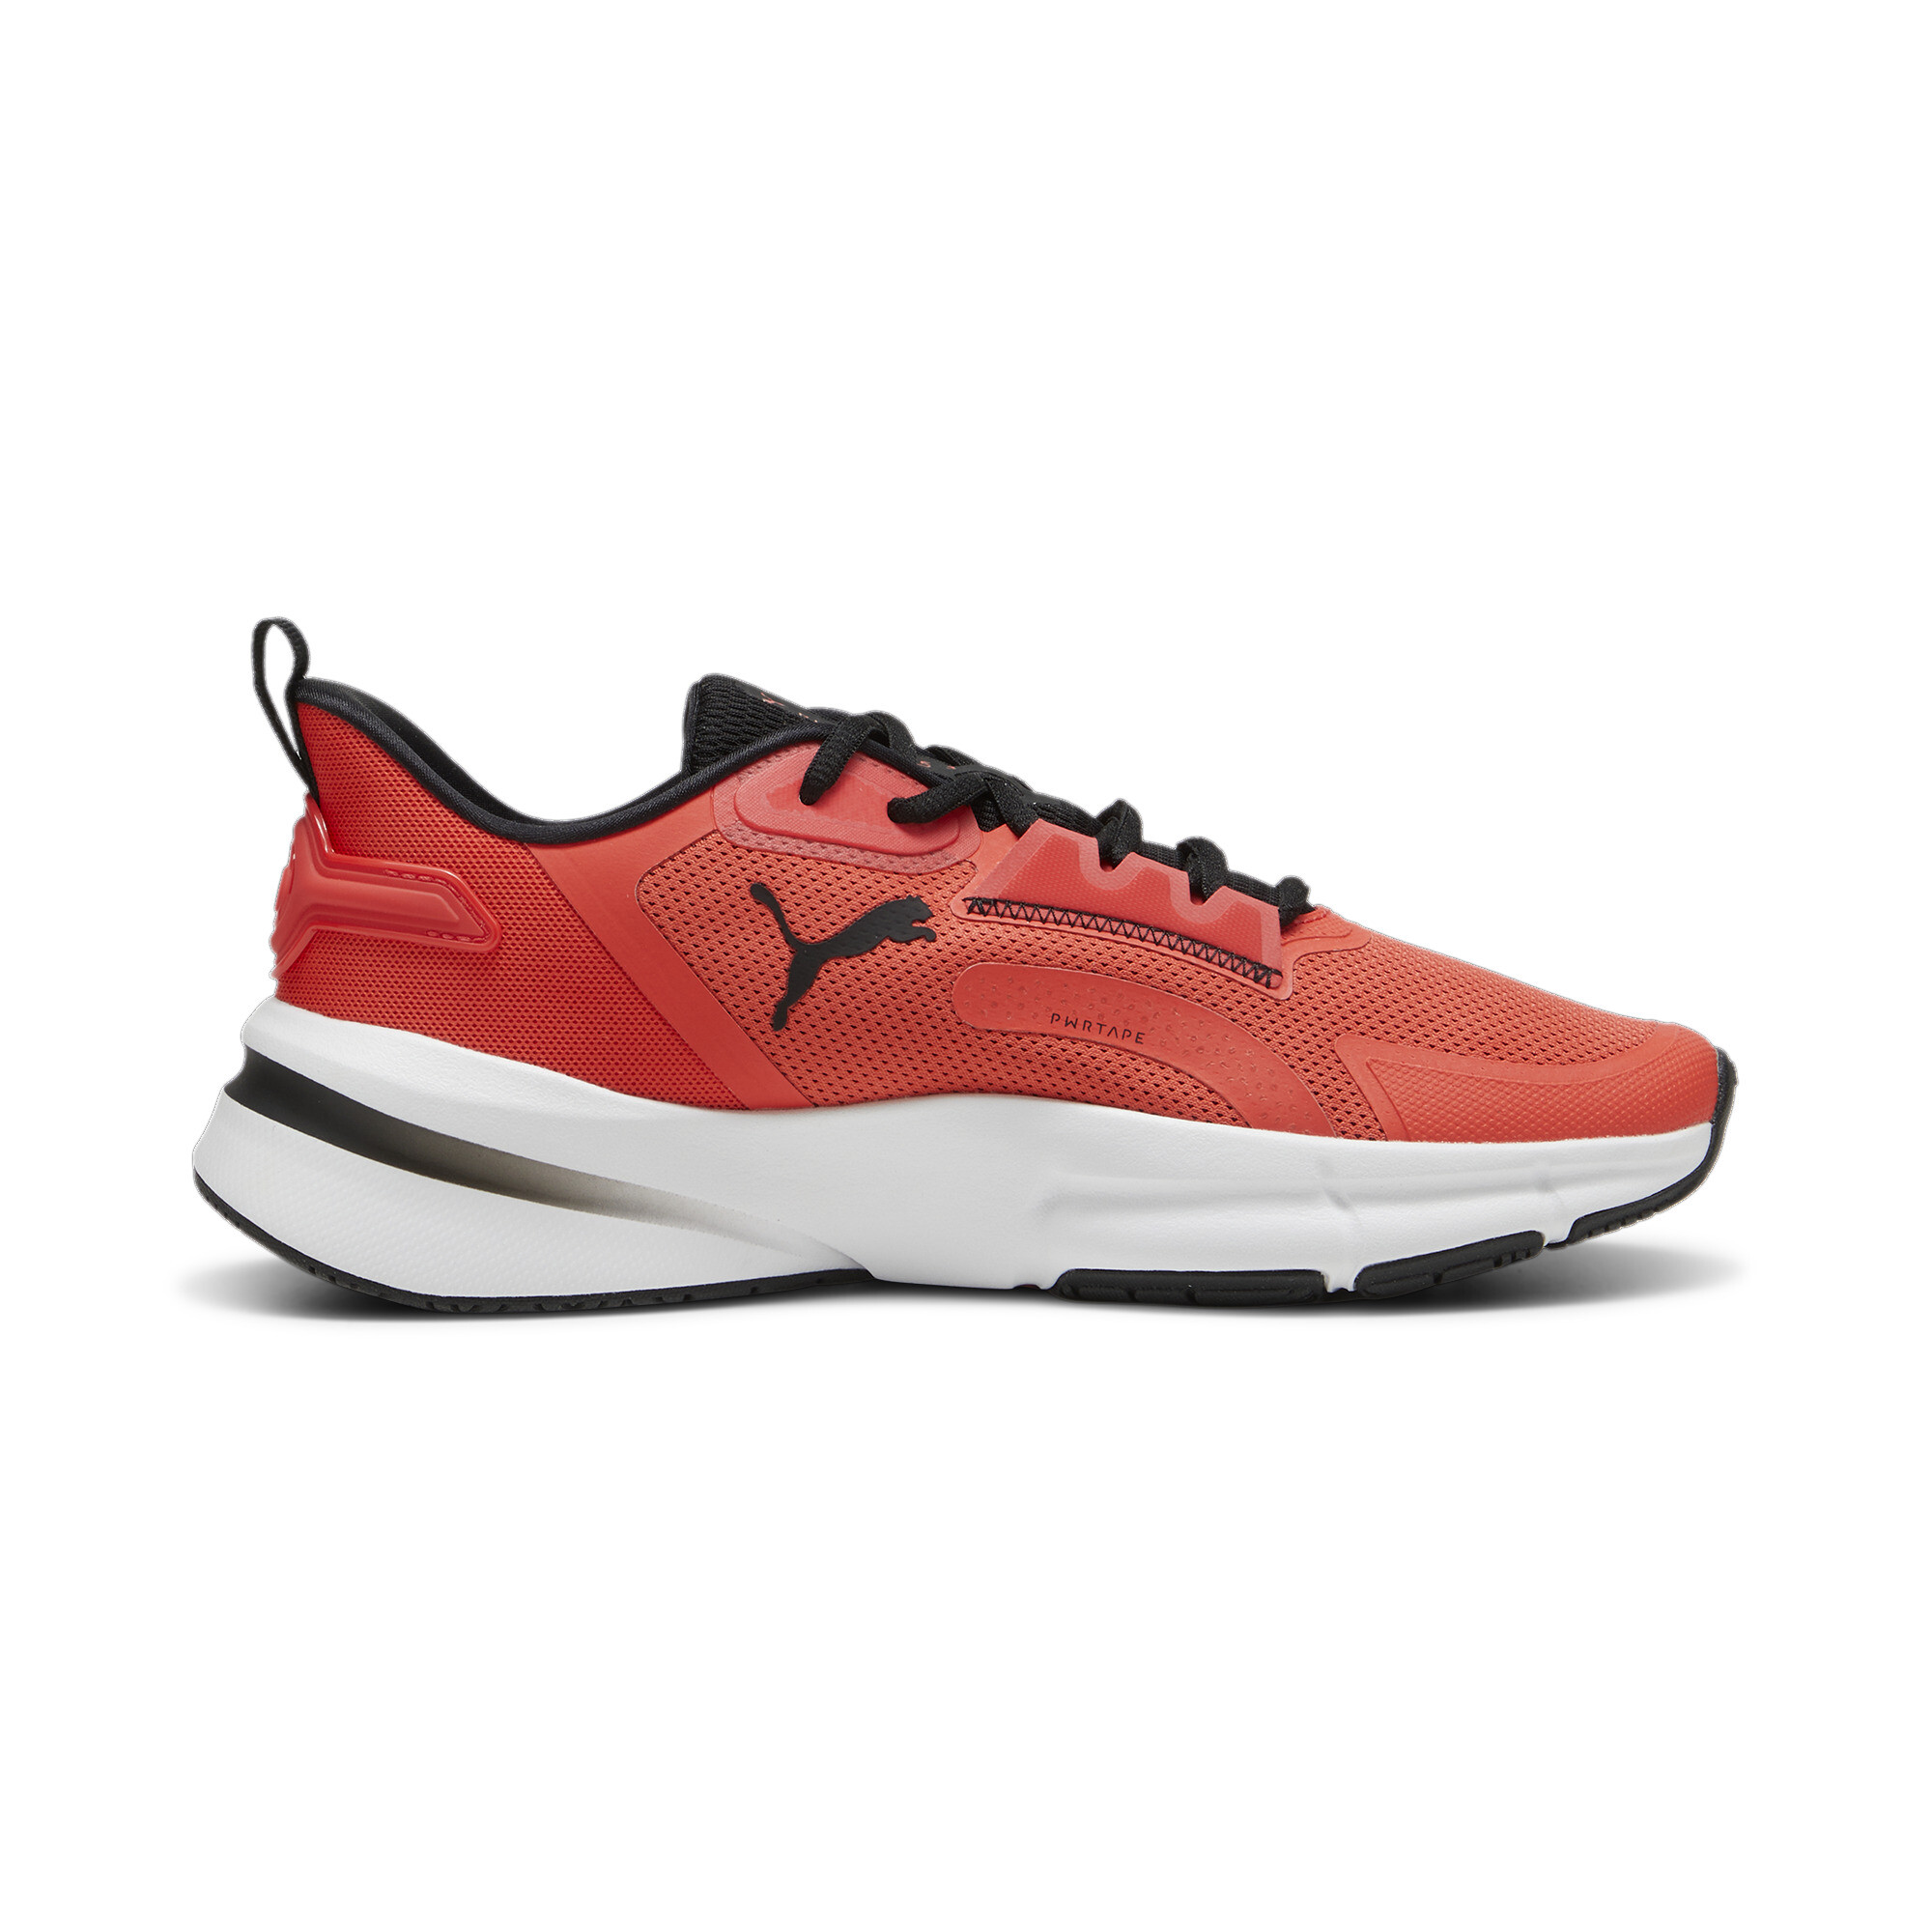 Men's PUMA PWRFrame TR 3 Training Shoes In Red, Size EU 41